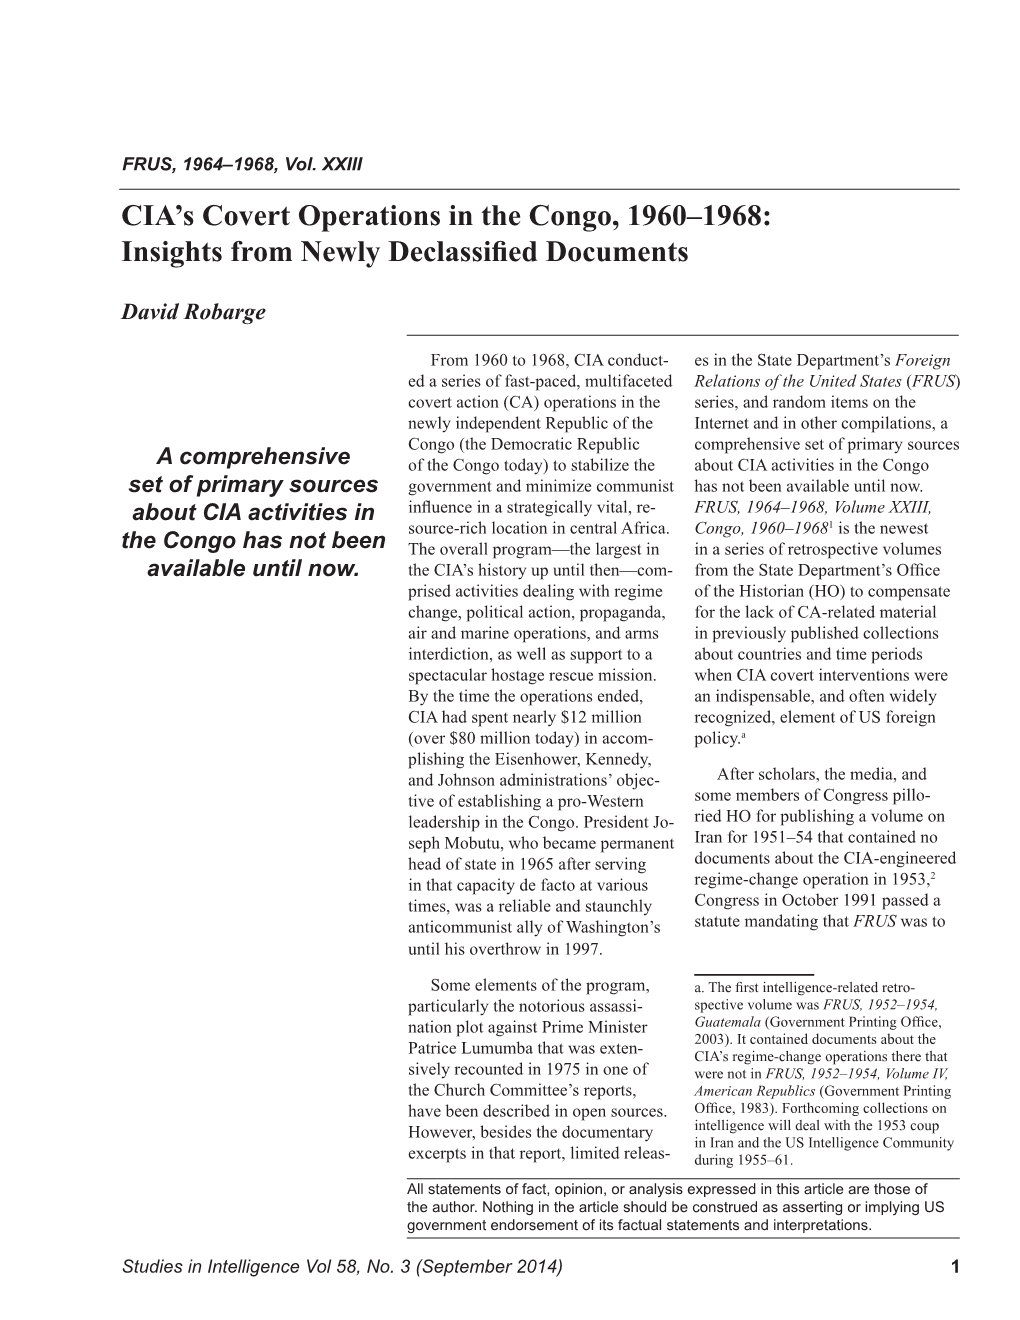 CIA's Covert Operations in the Congo, 1960–1968